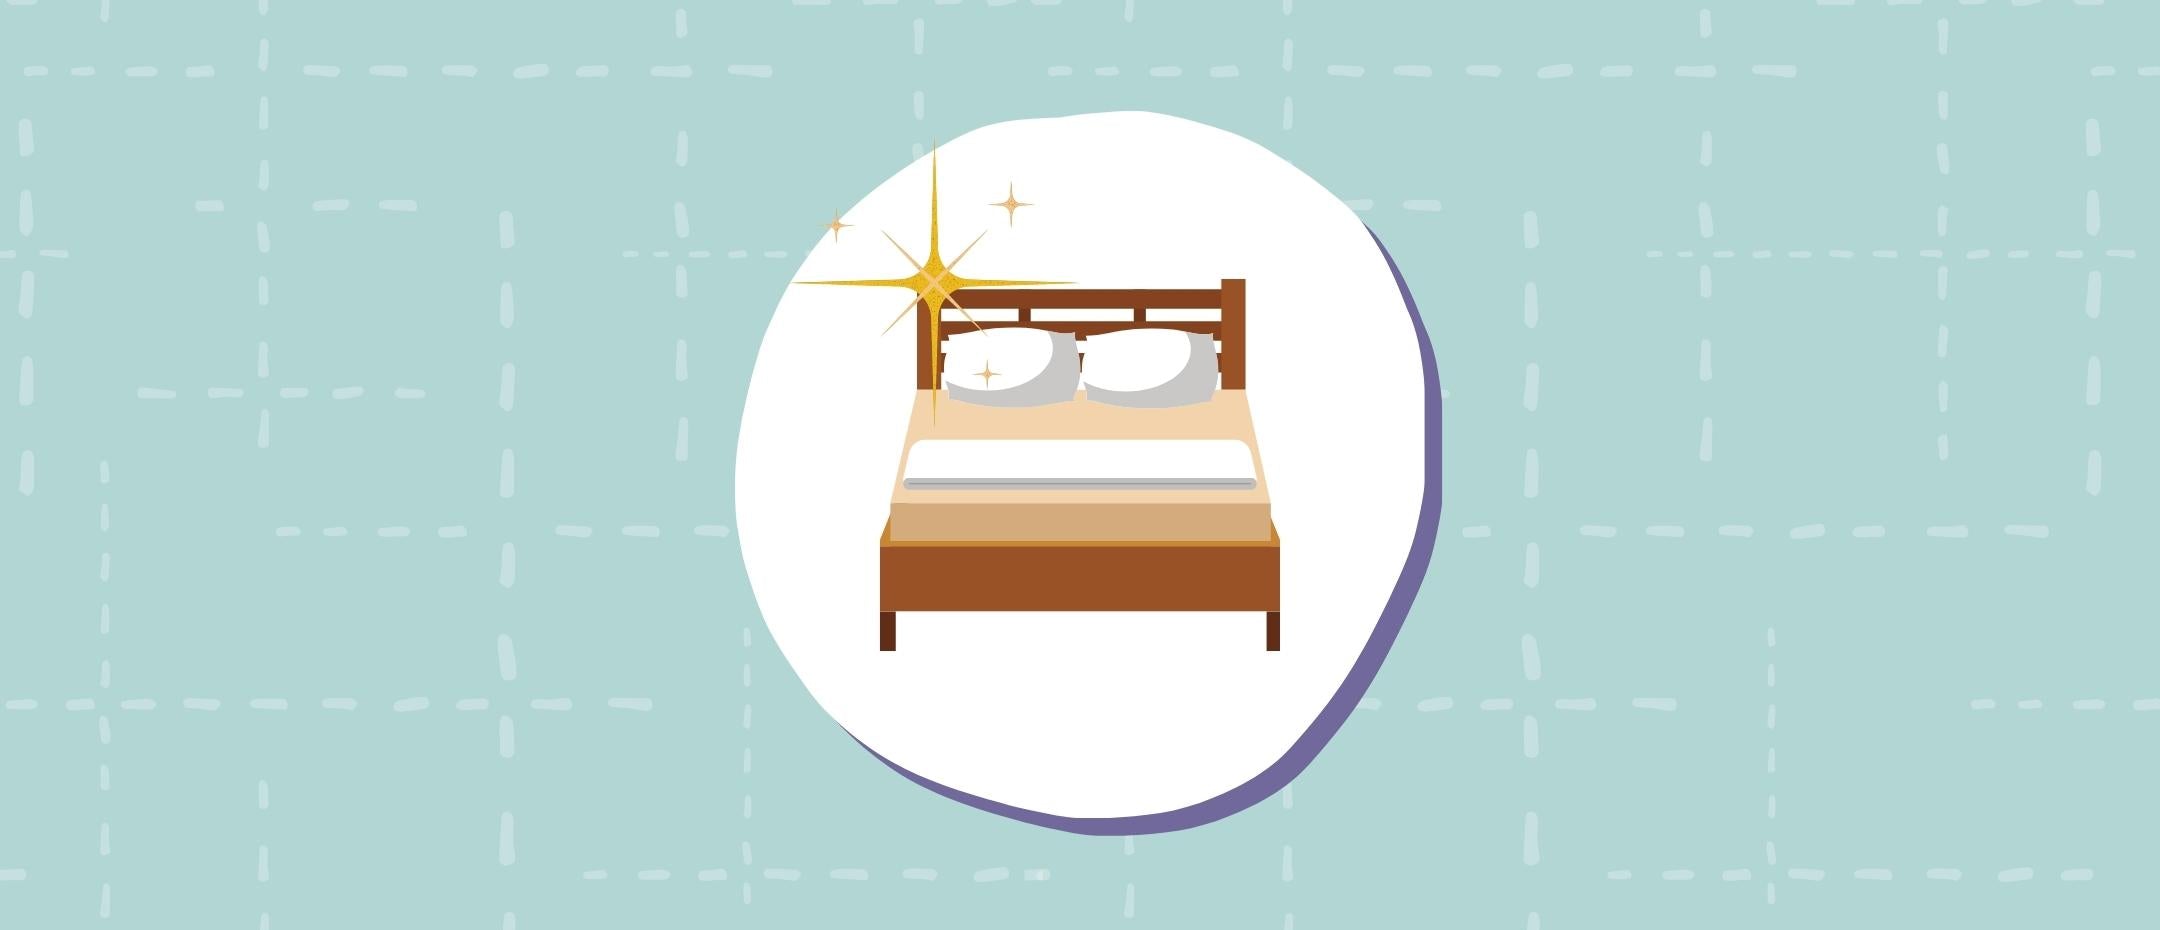 How to make a bed